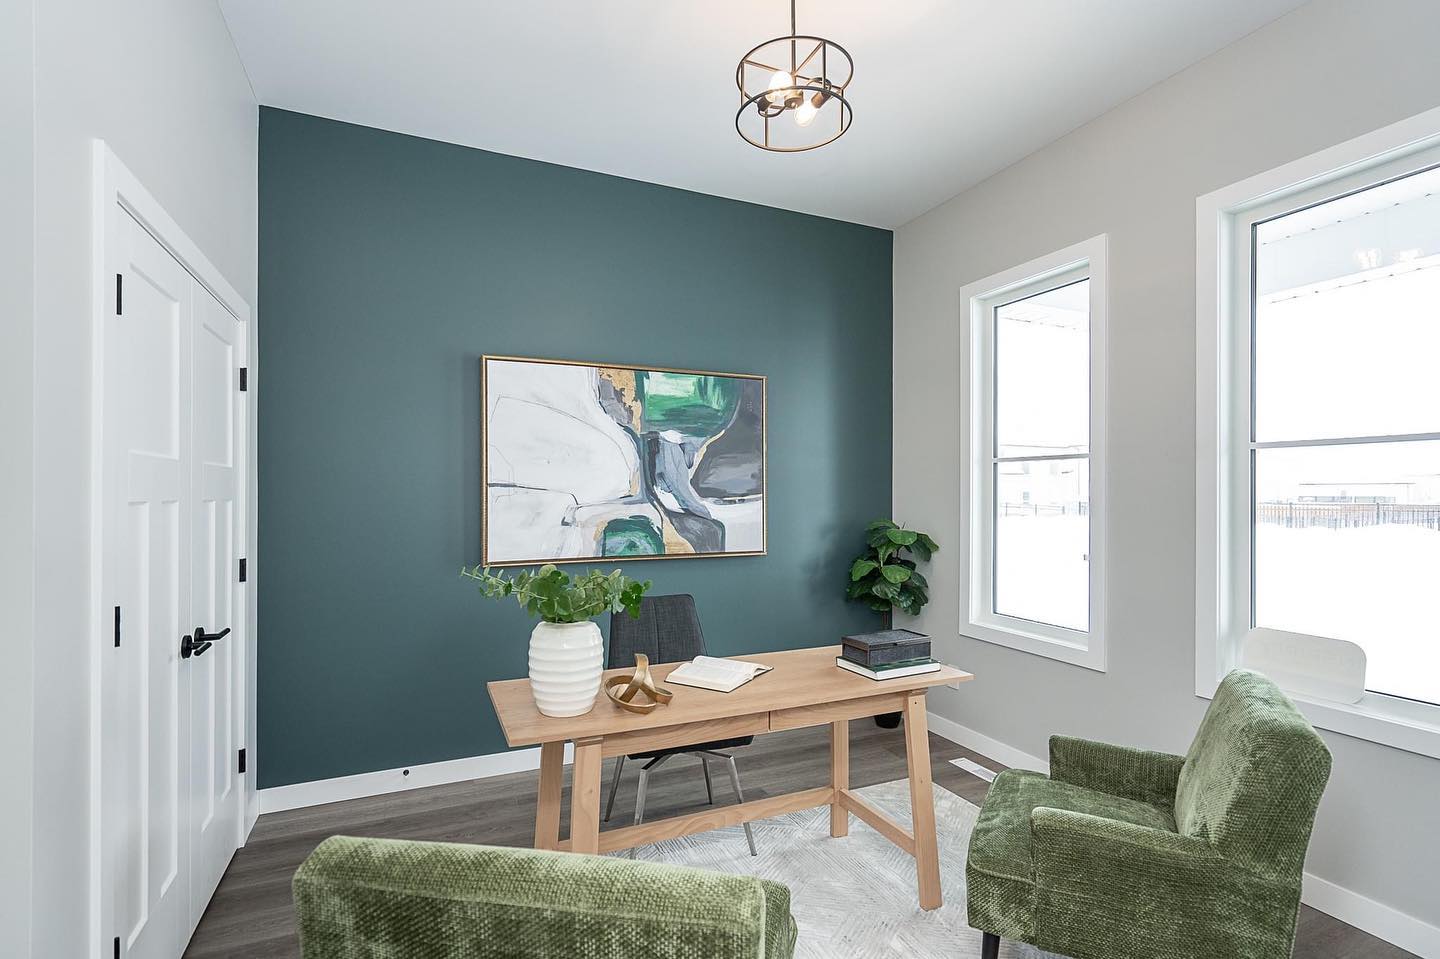 This main floor flex room makes for the perfect office/study space! The large windows add so much natural light and the custom painted feature wall brings life to the space. Pair it with some fun pieces to add personality. 

📍 111 Valley Brook Road, Bridgwater Trails
Immediate possession available - learn more through the link in our bio.